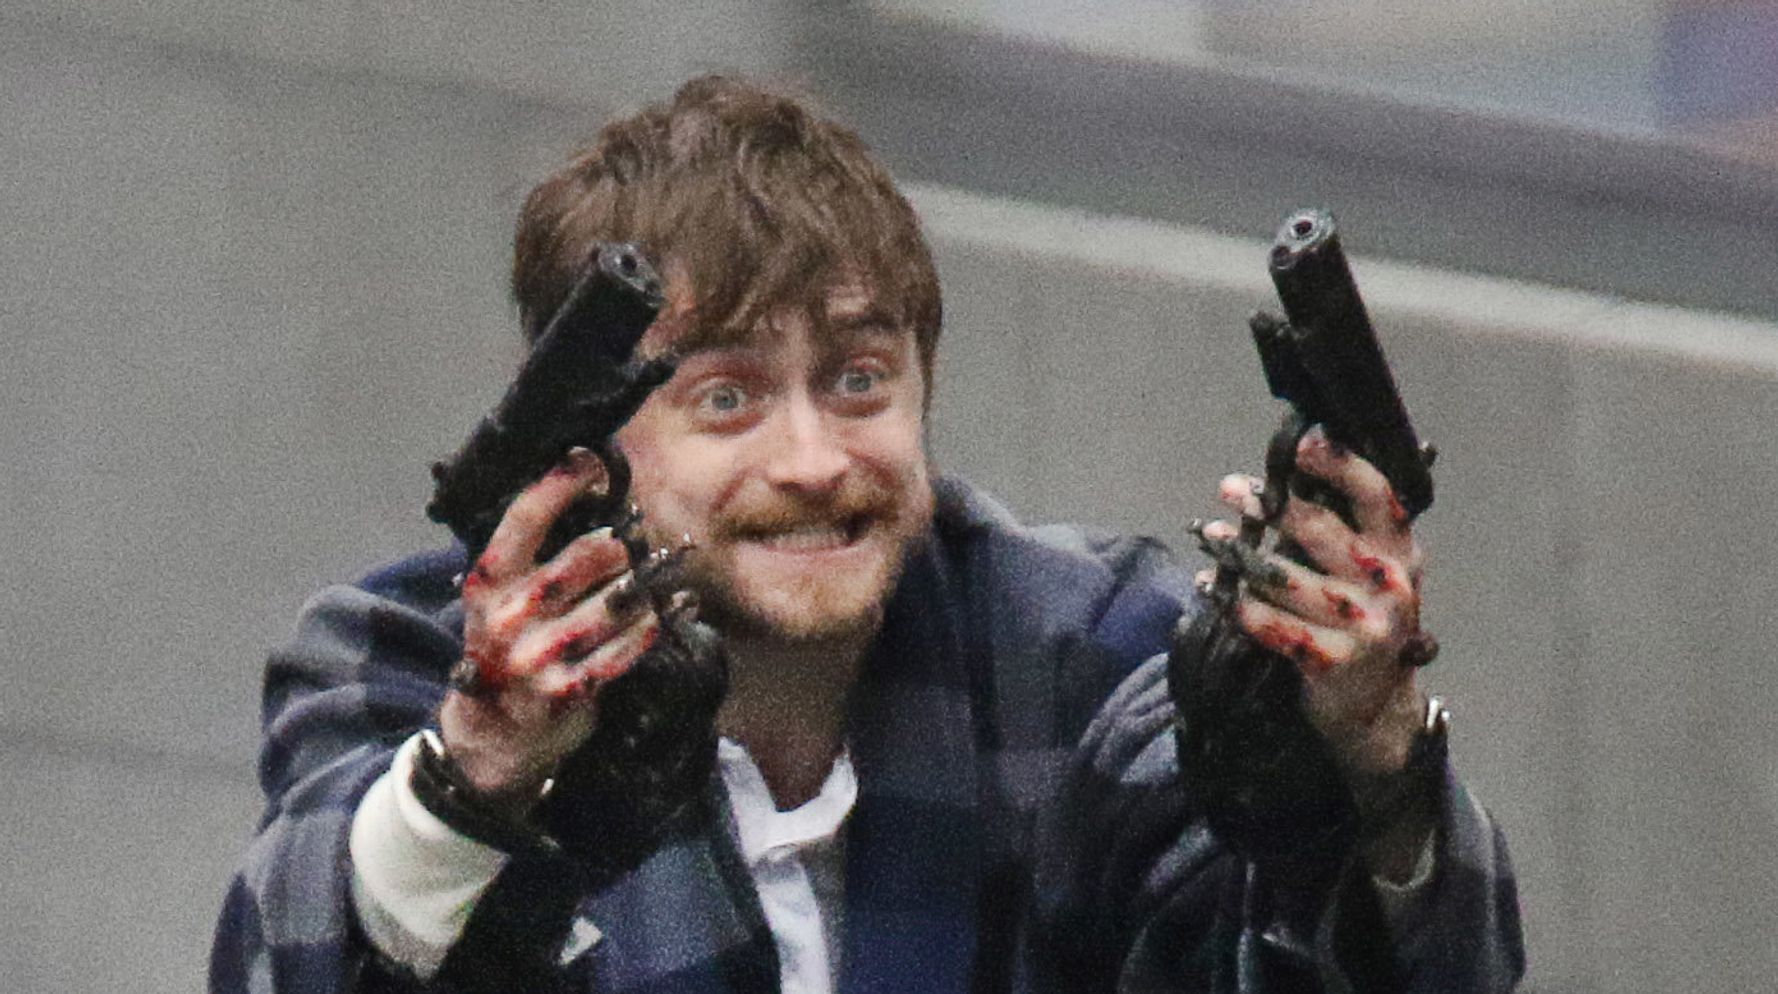 Photo Of Daniel Radcliffe Holding Guns In Crazy Slippers Becomes A Magical Meme...